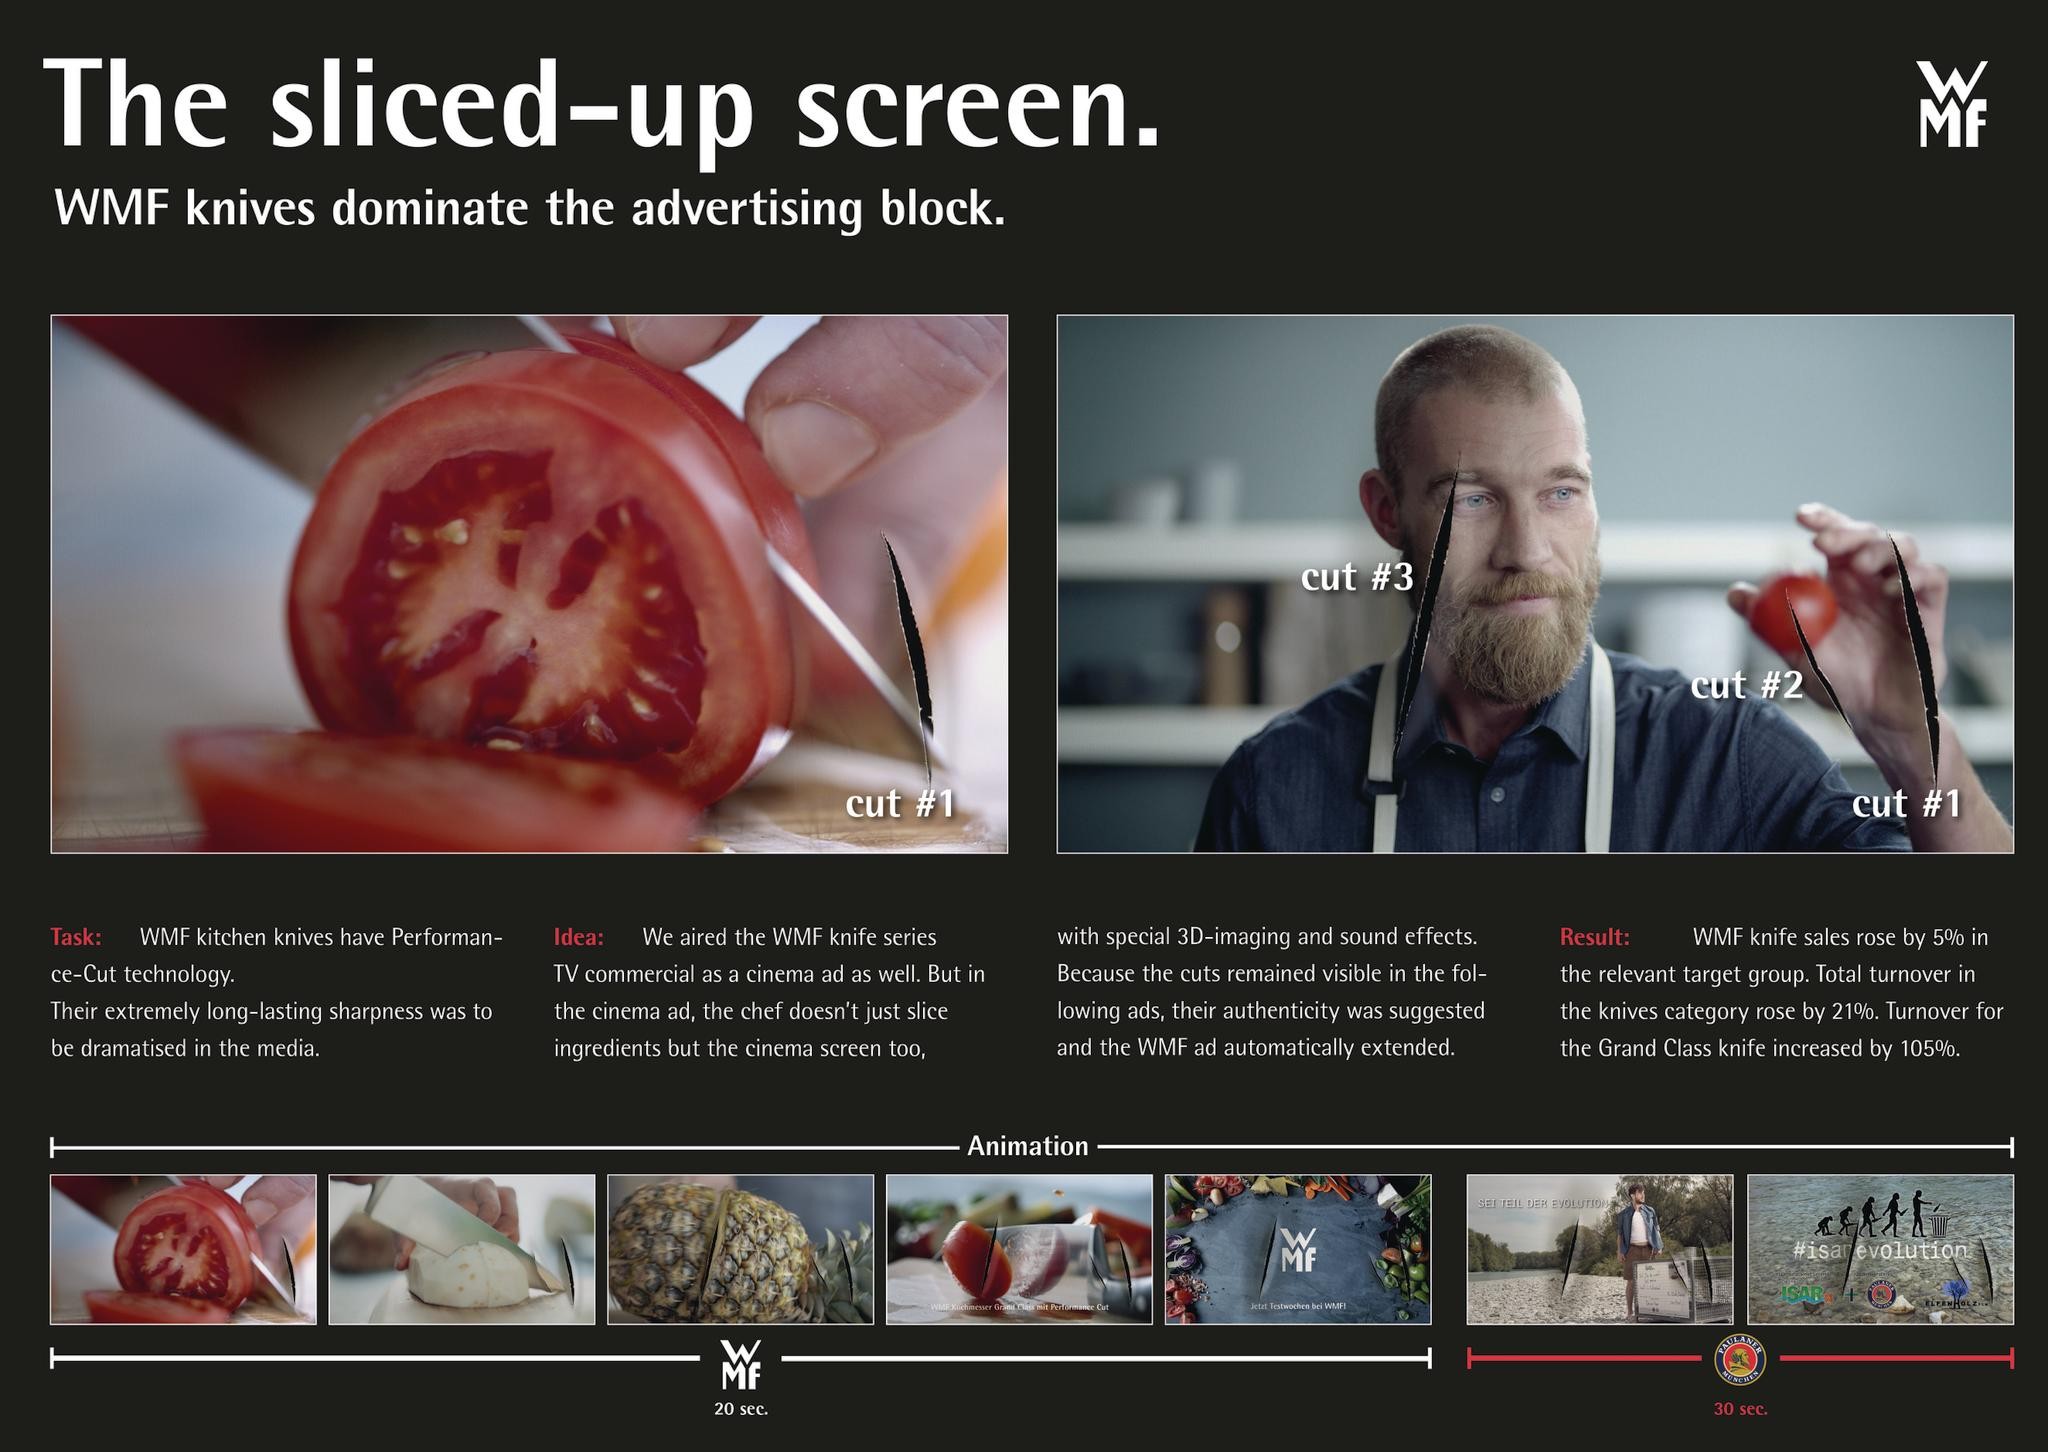 The sliced-up screen / WMF knives dominate the advertising block